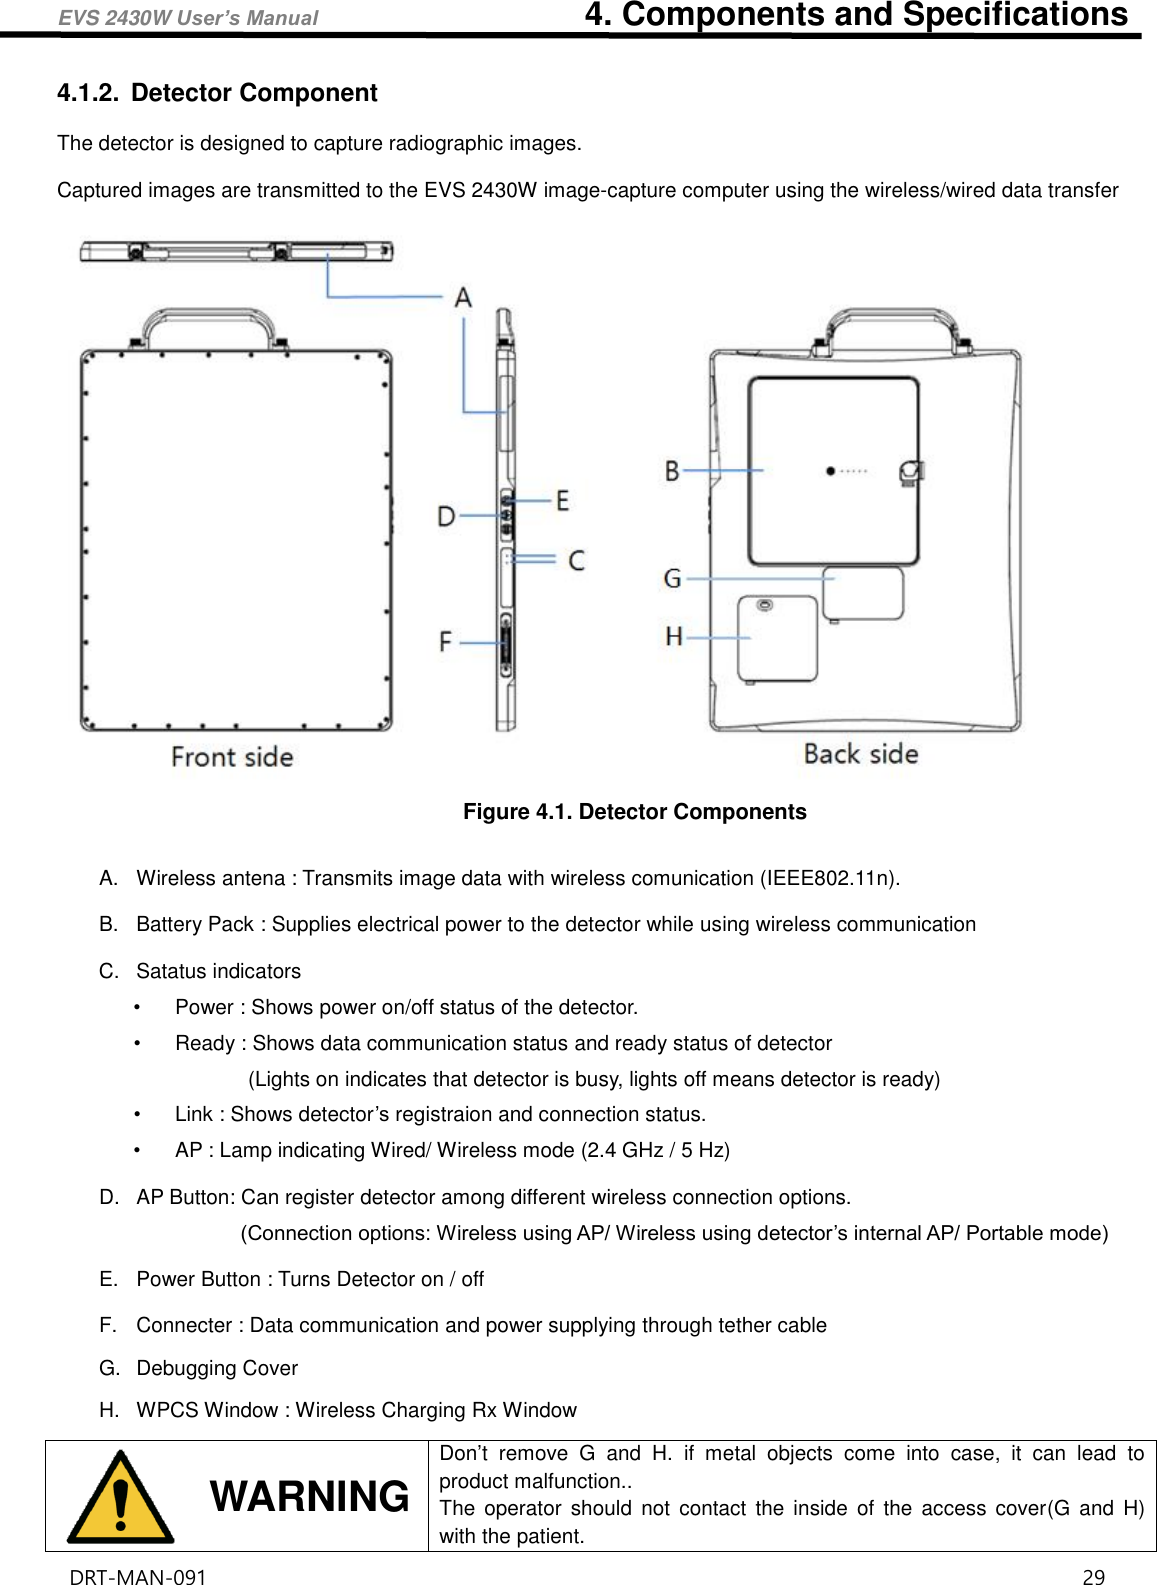 EVS 2430W User’s Manual                                4. Components and Specifications DRT-MAN-091                                                                                    29   4.1.2.  Detector Component   The detector is designed to capture radiographic images. Captured images are transmitted to the EVS 2430W image-capture computer using the wireless/wired data transfer  Figure 4.1. Detector Components  A.  Wireless antena : Transmits image data with wireless comunication (IEEE802.11n). B.  Battery Pack : Supplies electrical power to the detector while using wireless communication C.  Satatus indicators •  Power : Shows power on/off status of the detector. •  Ready : Shows data communication status and ready status of detector               (Lights on indicates that detector is busy, lights off means detector is ready) •  Link : Shows detector’s registraion and connection status. • AP : Lamp indicating Wired/ Wireless mode (2.4 GHz / 5 Hz) D.  AP Button: Can register detector among different wireless connection options.           (Connection options: Wireless using AP/ Wireless using detector’s internal AP/ Portable mode) E.  Power Button : Turns Detector on / off F.  Connecter : Data communication and power supplying through tether cable G.  Debugging Cover   H.  WPCS Window : Wireless Charging Rx Window  WARNING Don’t  remove  G  and  H.  if  metal  objects  come  into  case,  it  can  lead  to product malfunction.. The  operator should  not  contact  the  inside  of  the  access  cover(G  and  H) with the patient. 